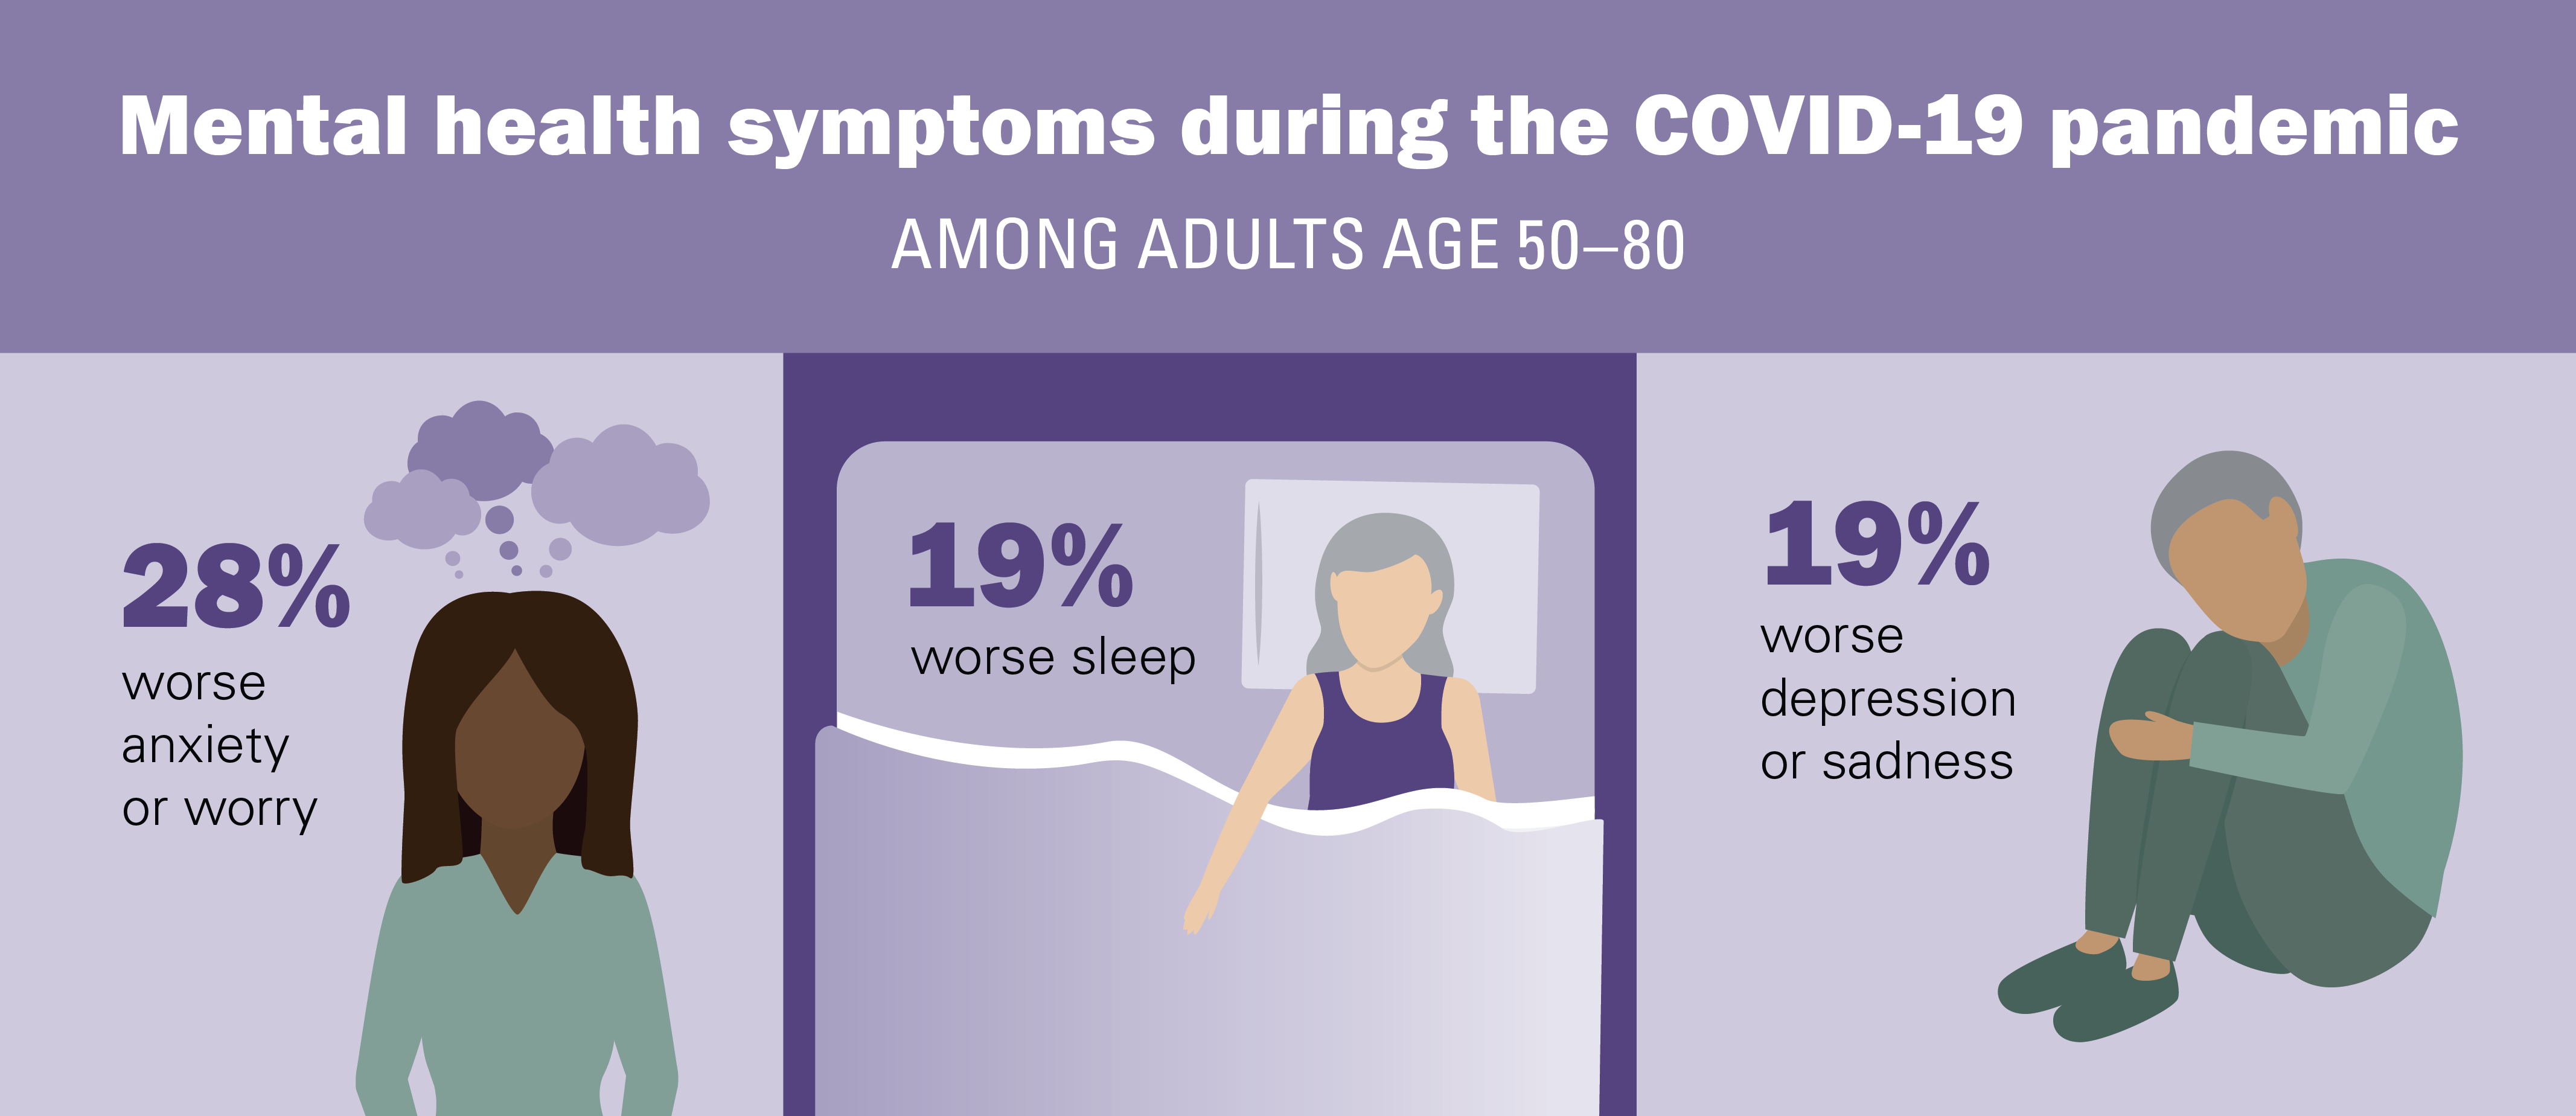 Mental health symptoms during the COVID-19 pandemic among adults 50-80